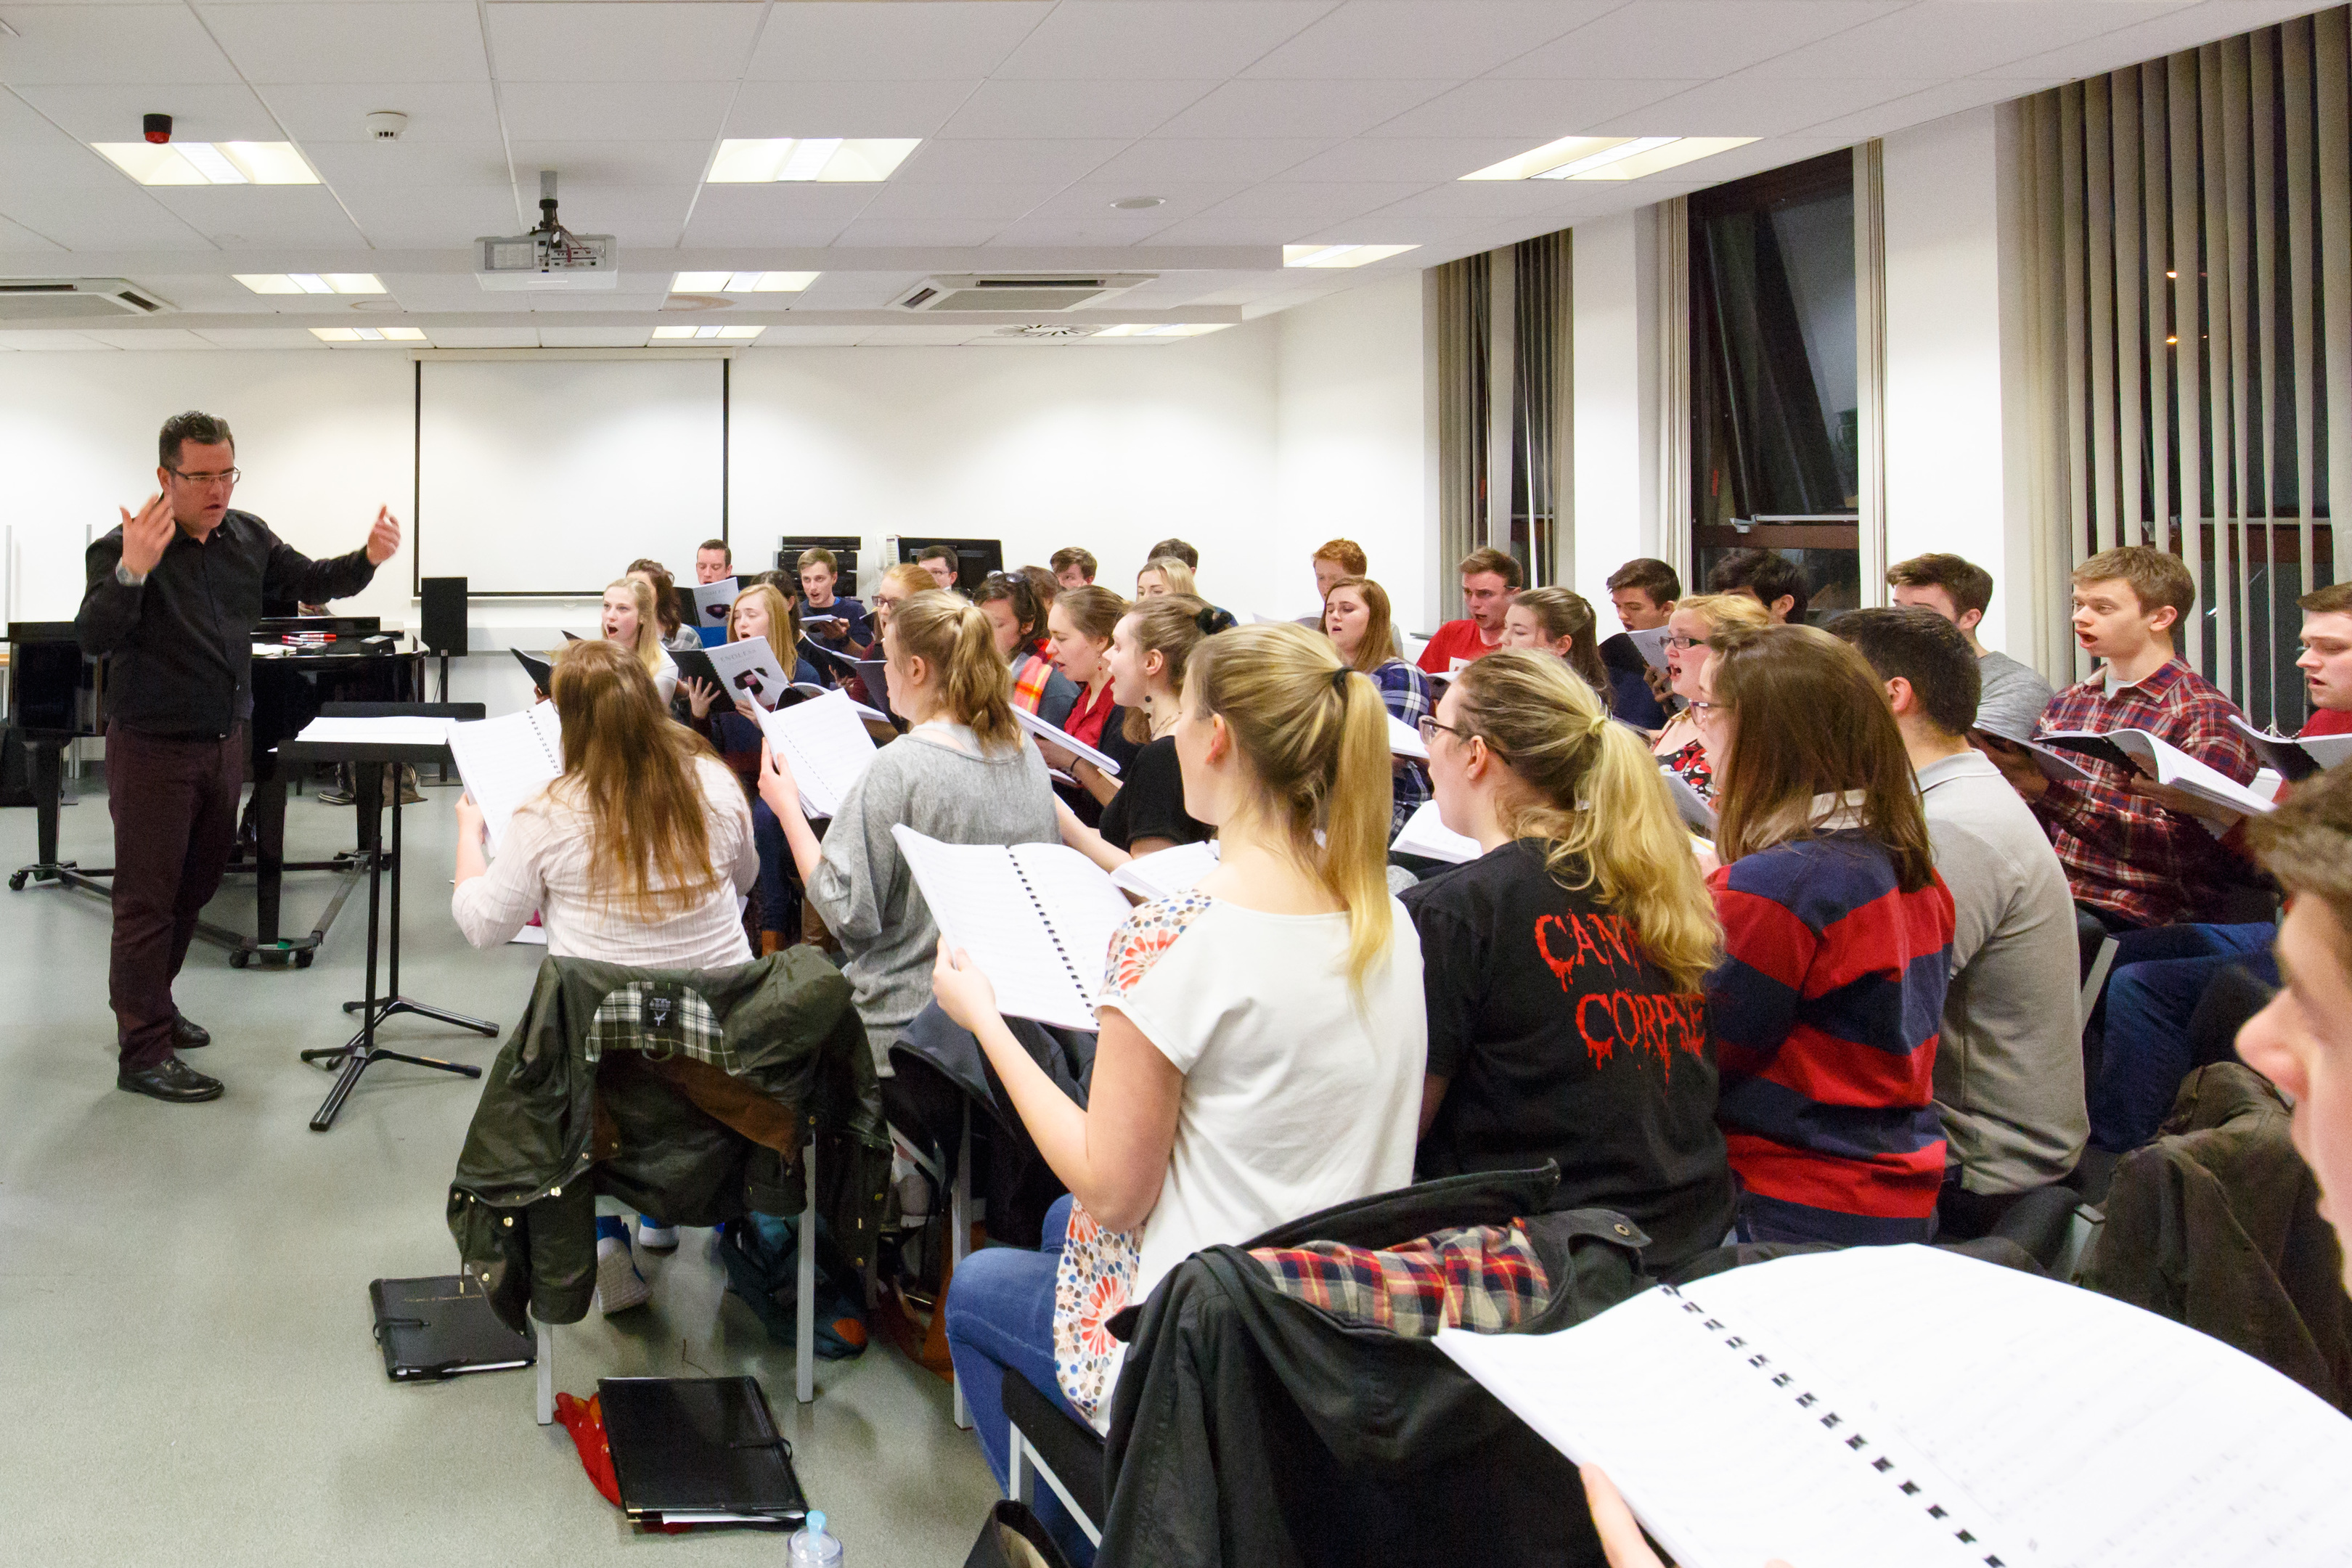 Professor Paul Mealor leads rehearsals for his University of Aberdeen Chamber Choir.